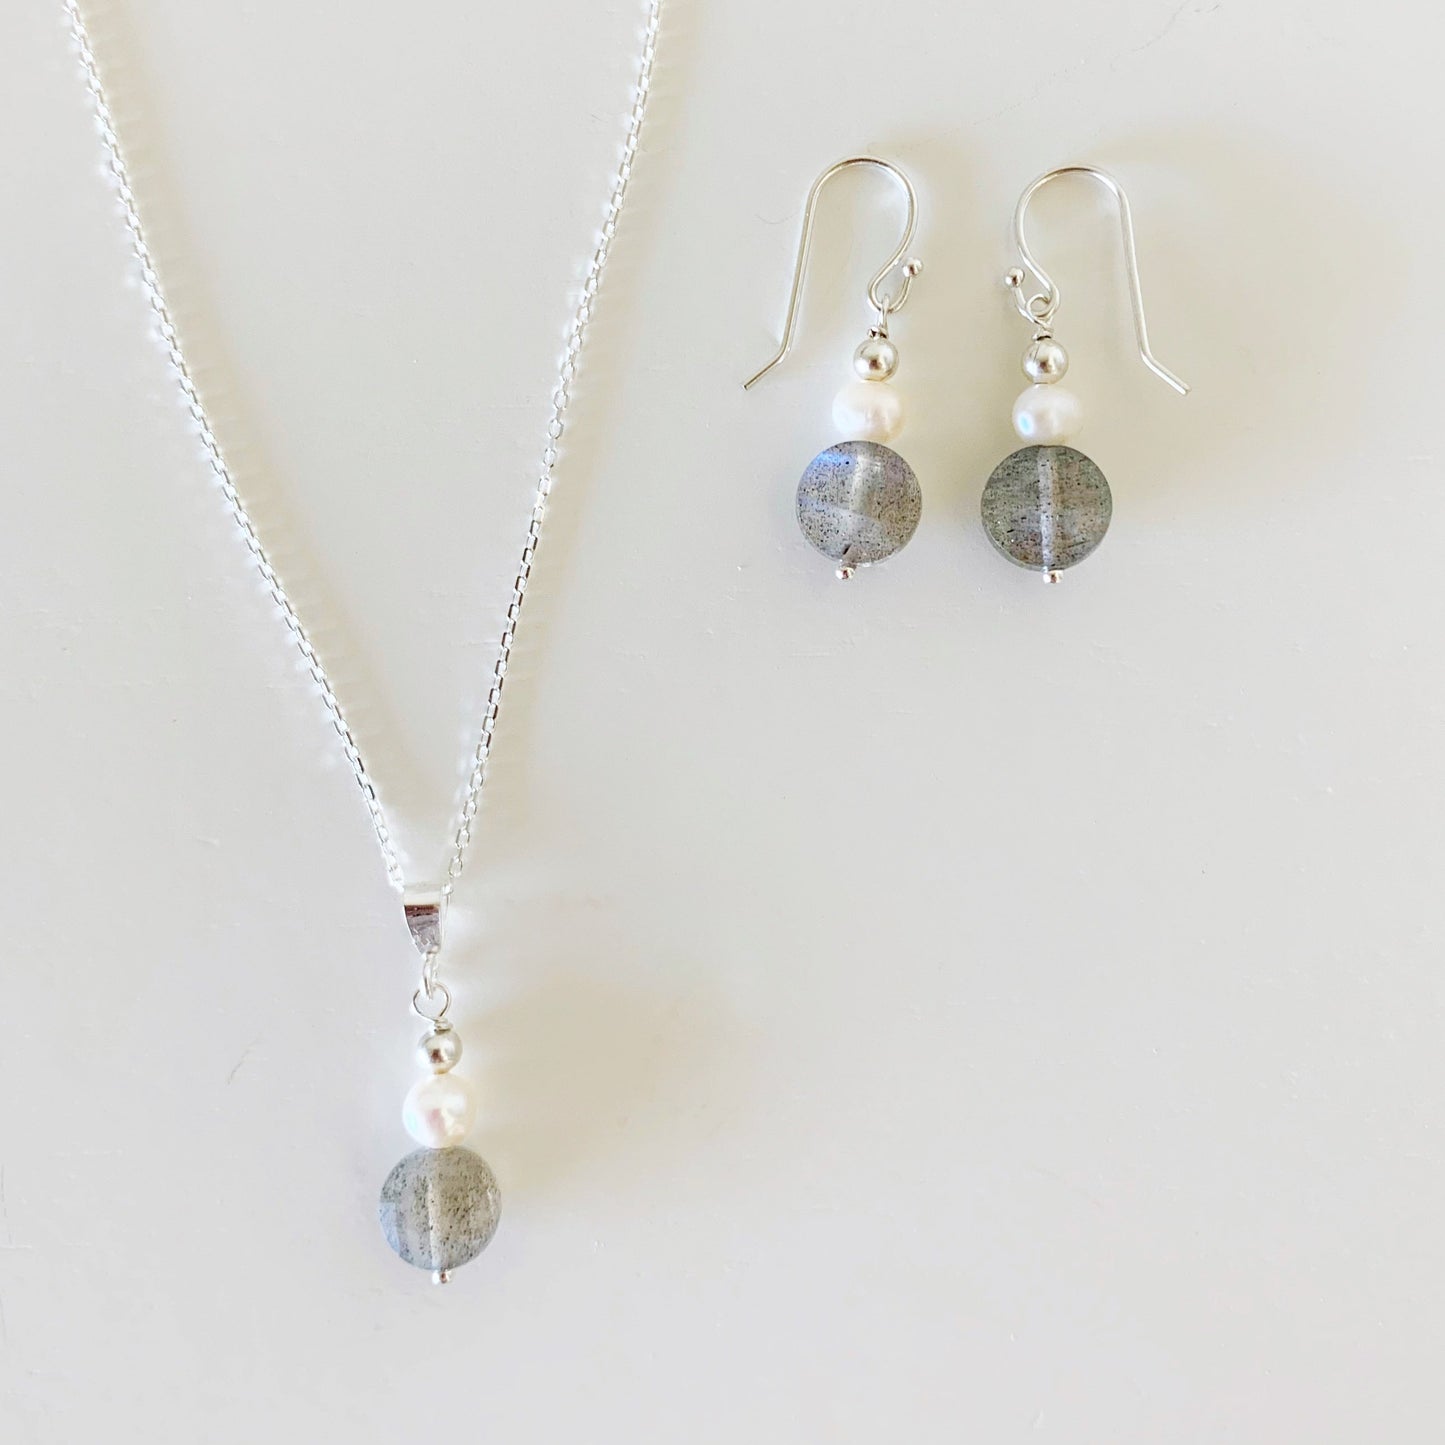 Arctic pendant necklace and earrings by mermaids and madeleines are created with freshwater pearl and faceted labradorite coins with sterling silver findings and chain. this set is photographed ona white surface